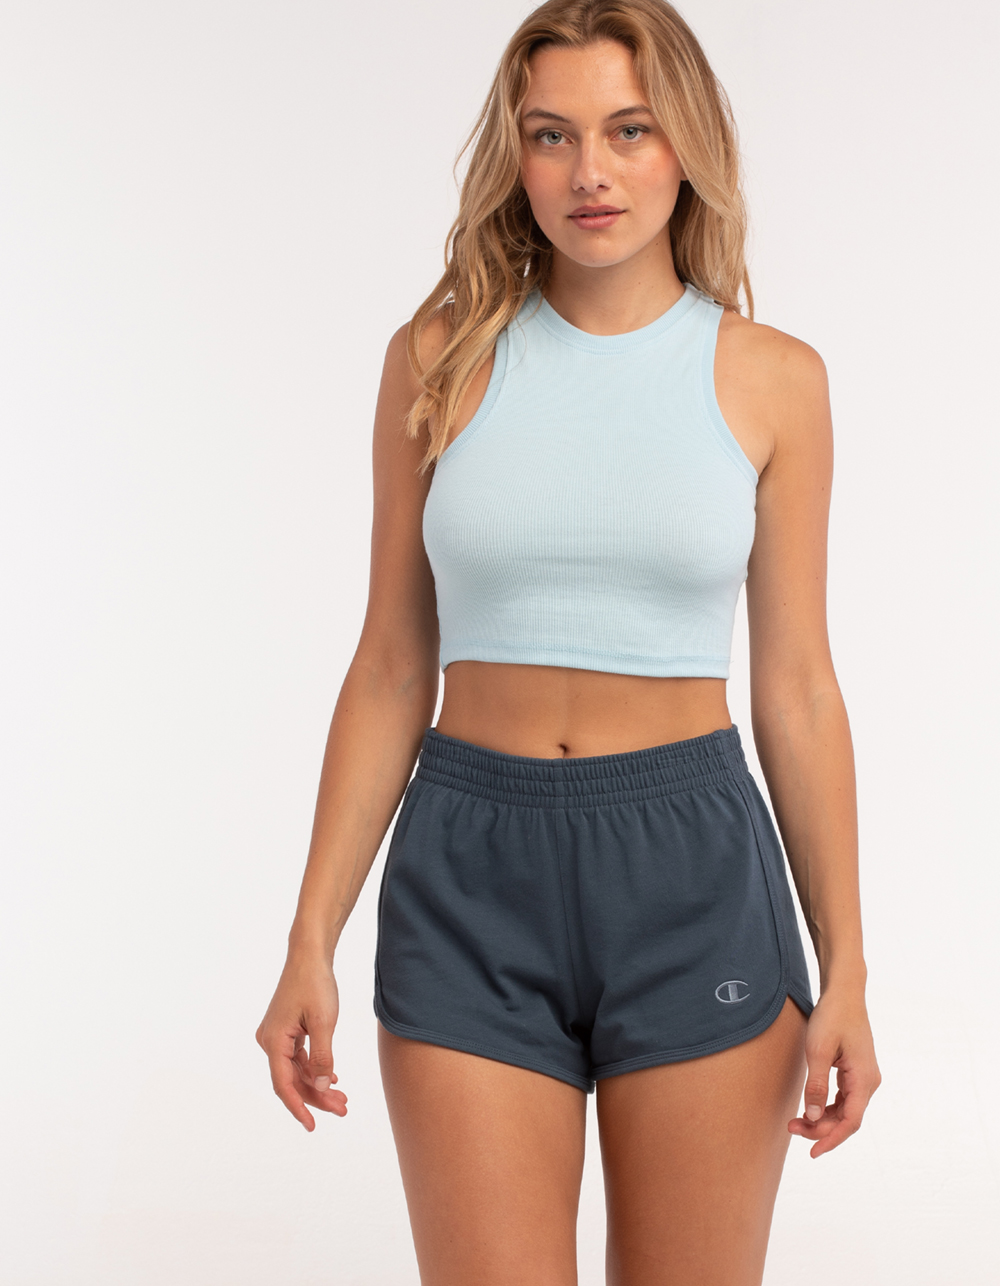  Women's Athletic Shorts - THE GYM PEOPLE / Women's Athletic  Shorts / Women's Act: Clothing, Shoes & Jewelry